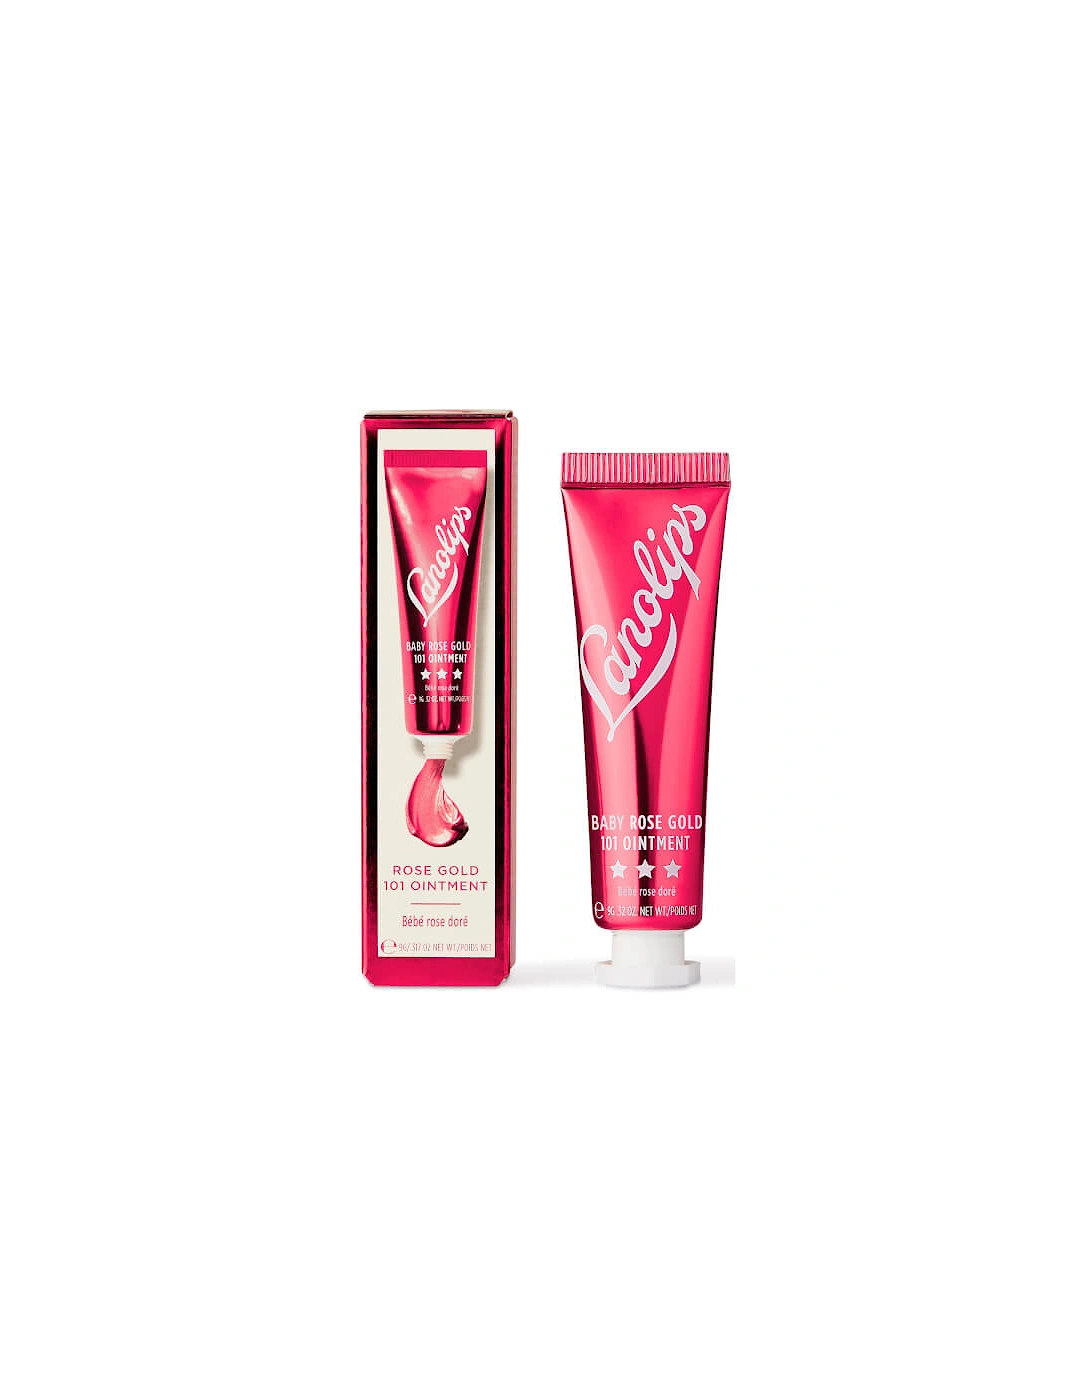 Baby Rose Gold 101 Lip Ointment 9g - Lanolips, 2 of 1